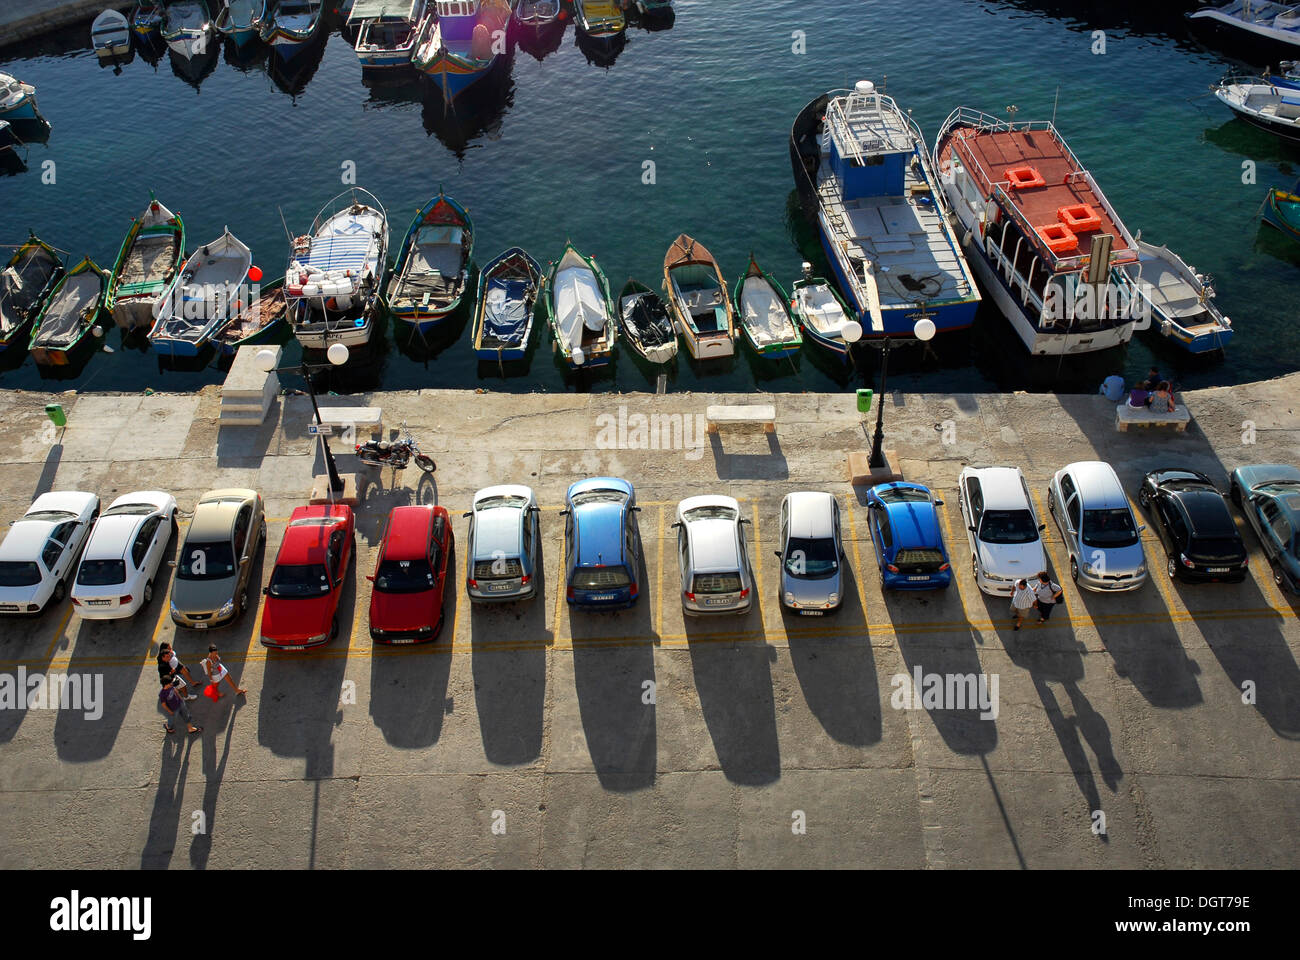 Parked cars and fishing boats in the harbour, Bay of Marsalforn, Marsalforn, Gozo Island, Malta, Mediterranean Sea, Europe Stock Photo